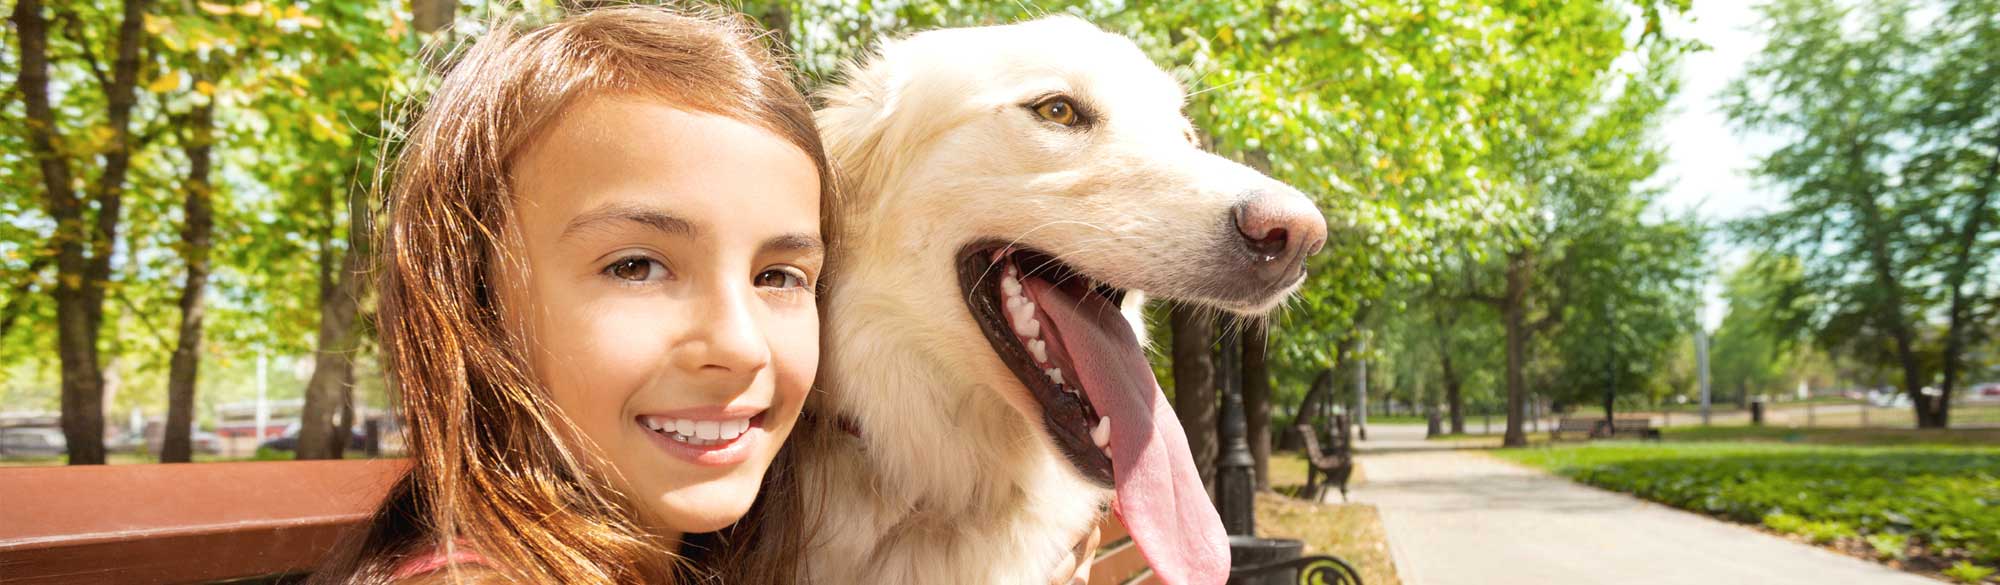 Girl smiling with her dog